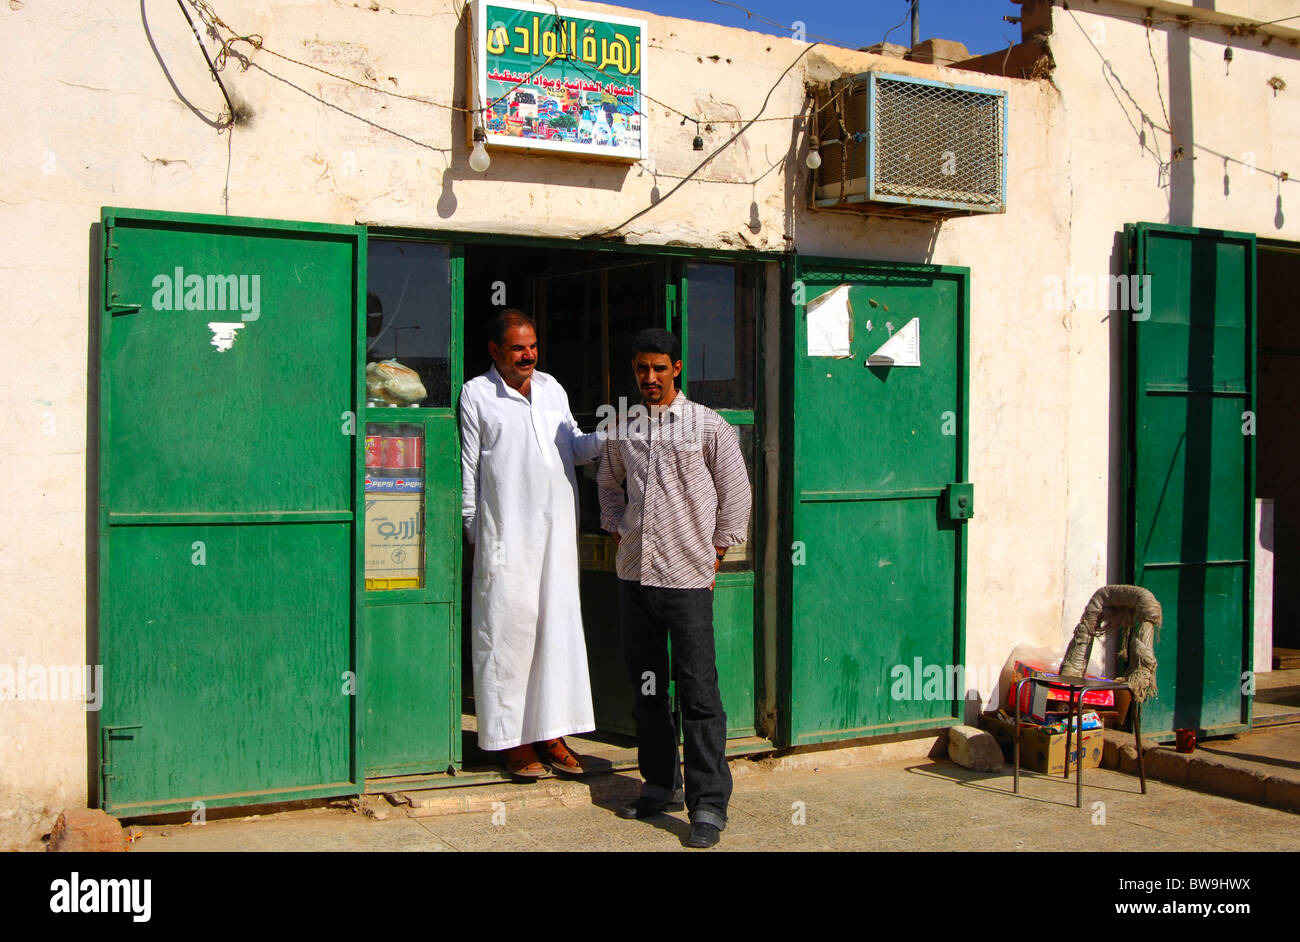 Two Arab men standing at the entrance to a Mom-and-Pop grocery store, Jeerma, Libya Stock Photo